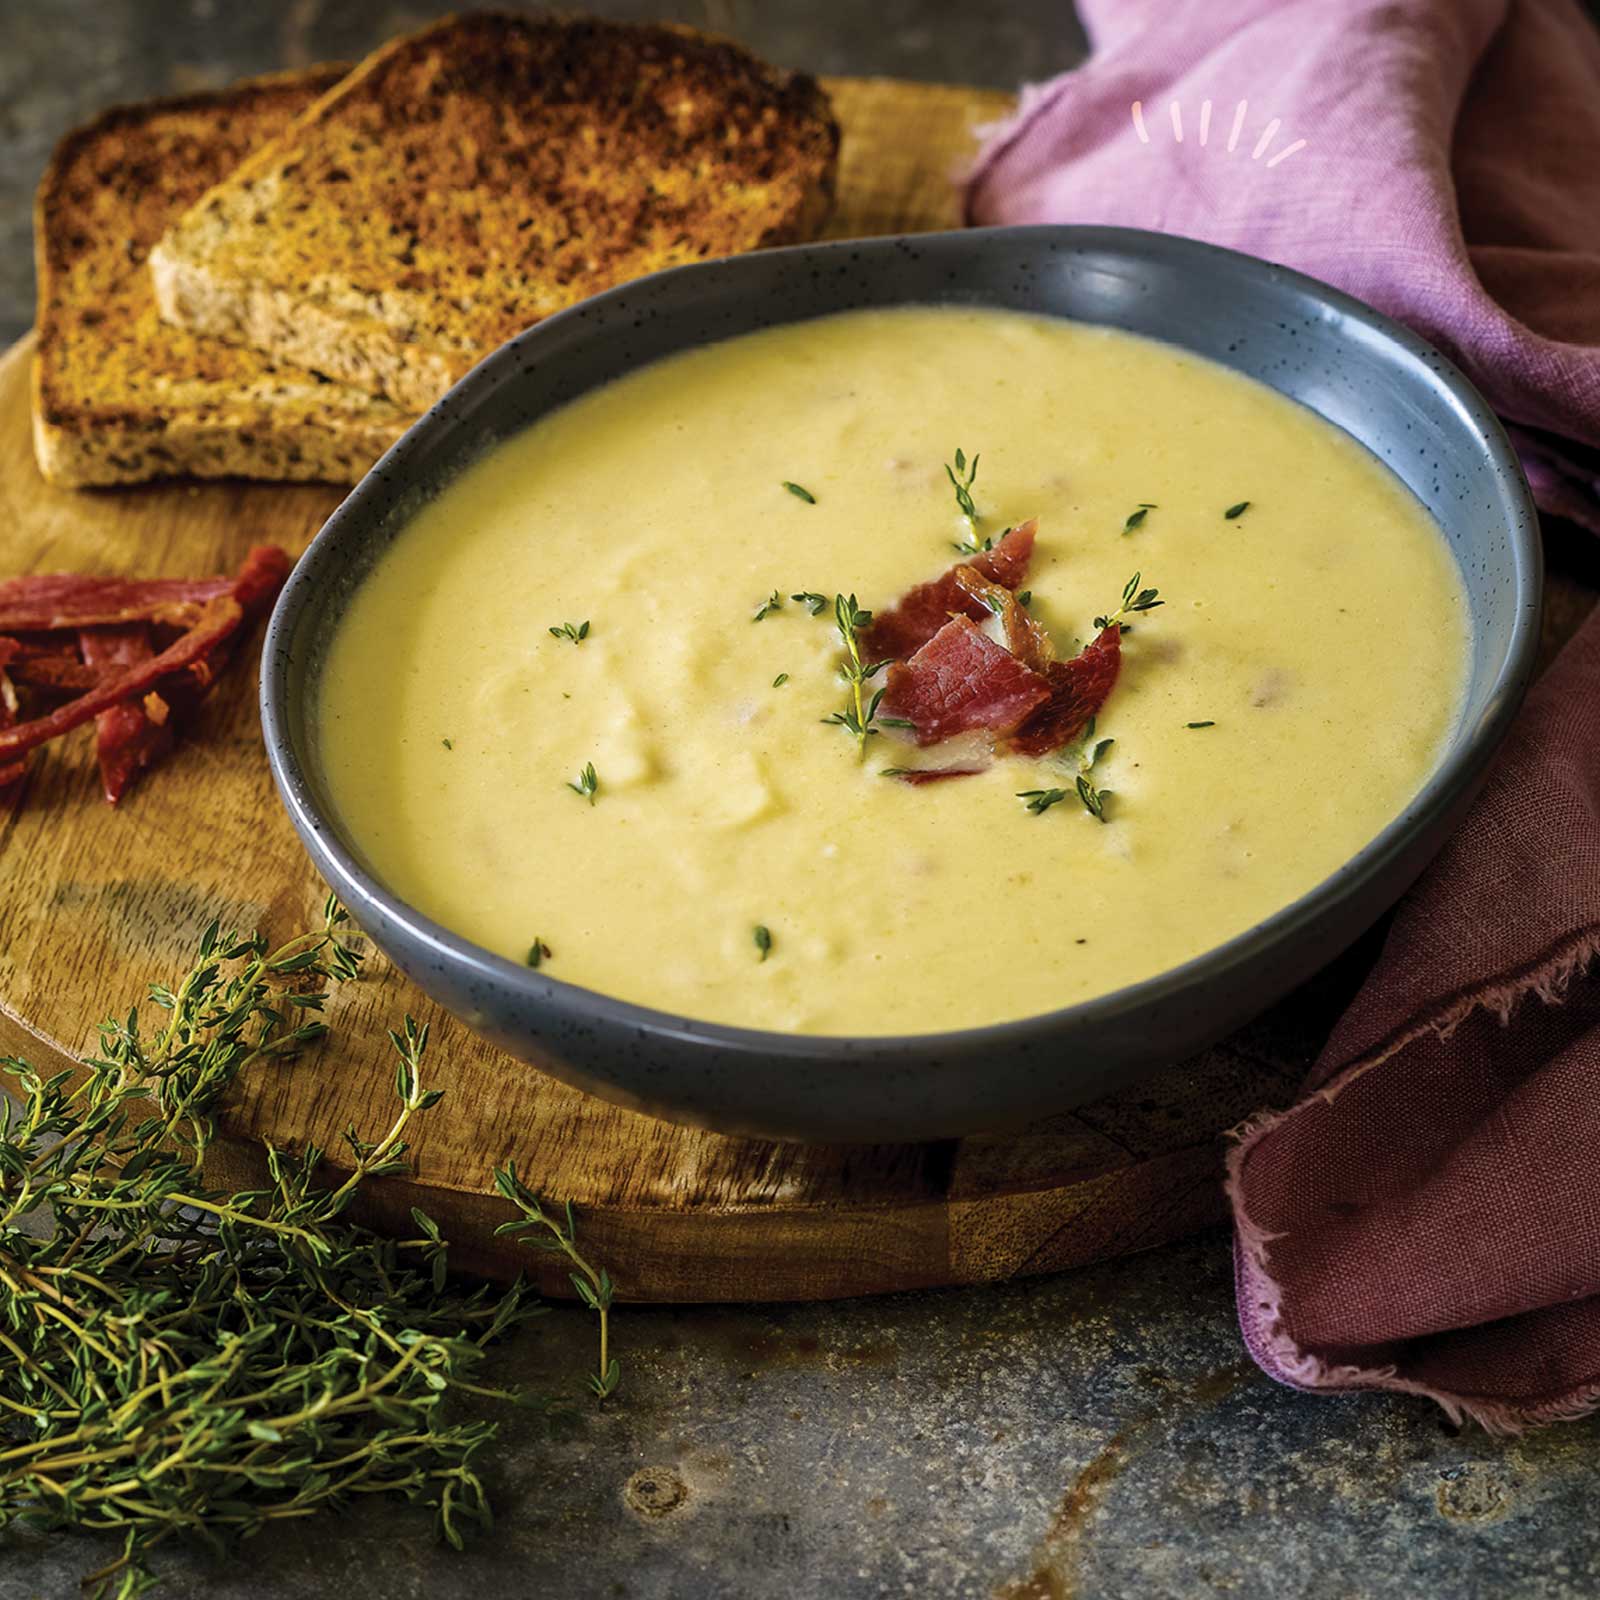 Dark blue bowl of creamy cauliflower and bacon soup sitting on a wooden board. Gluten-free toasts rests to the side. Fresh thyme leaves garnish the soup and the remaining herbs sit at the front of the image.